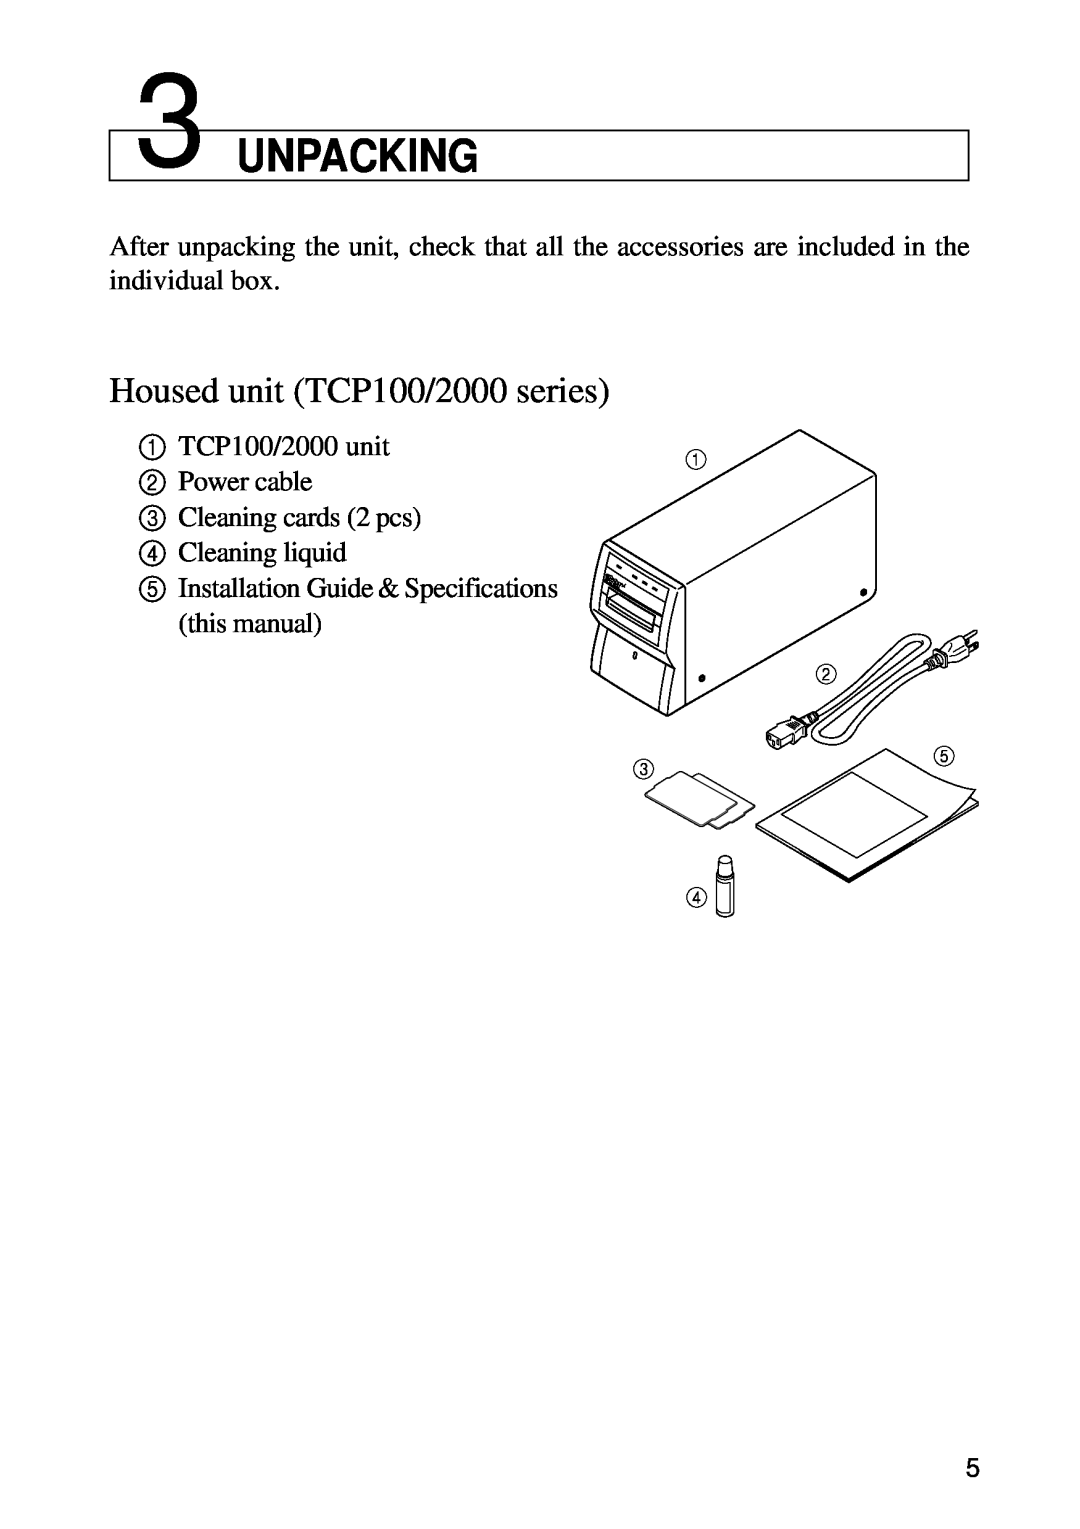 Star Micronics TCP100 Series, TCP2000 Series specifications Unpacking, Housed unit TCP100/2000 series 